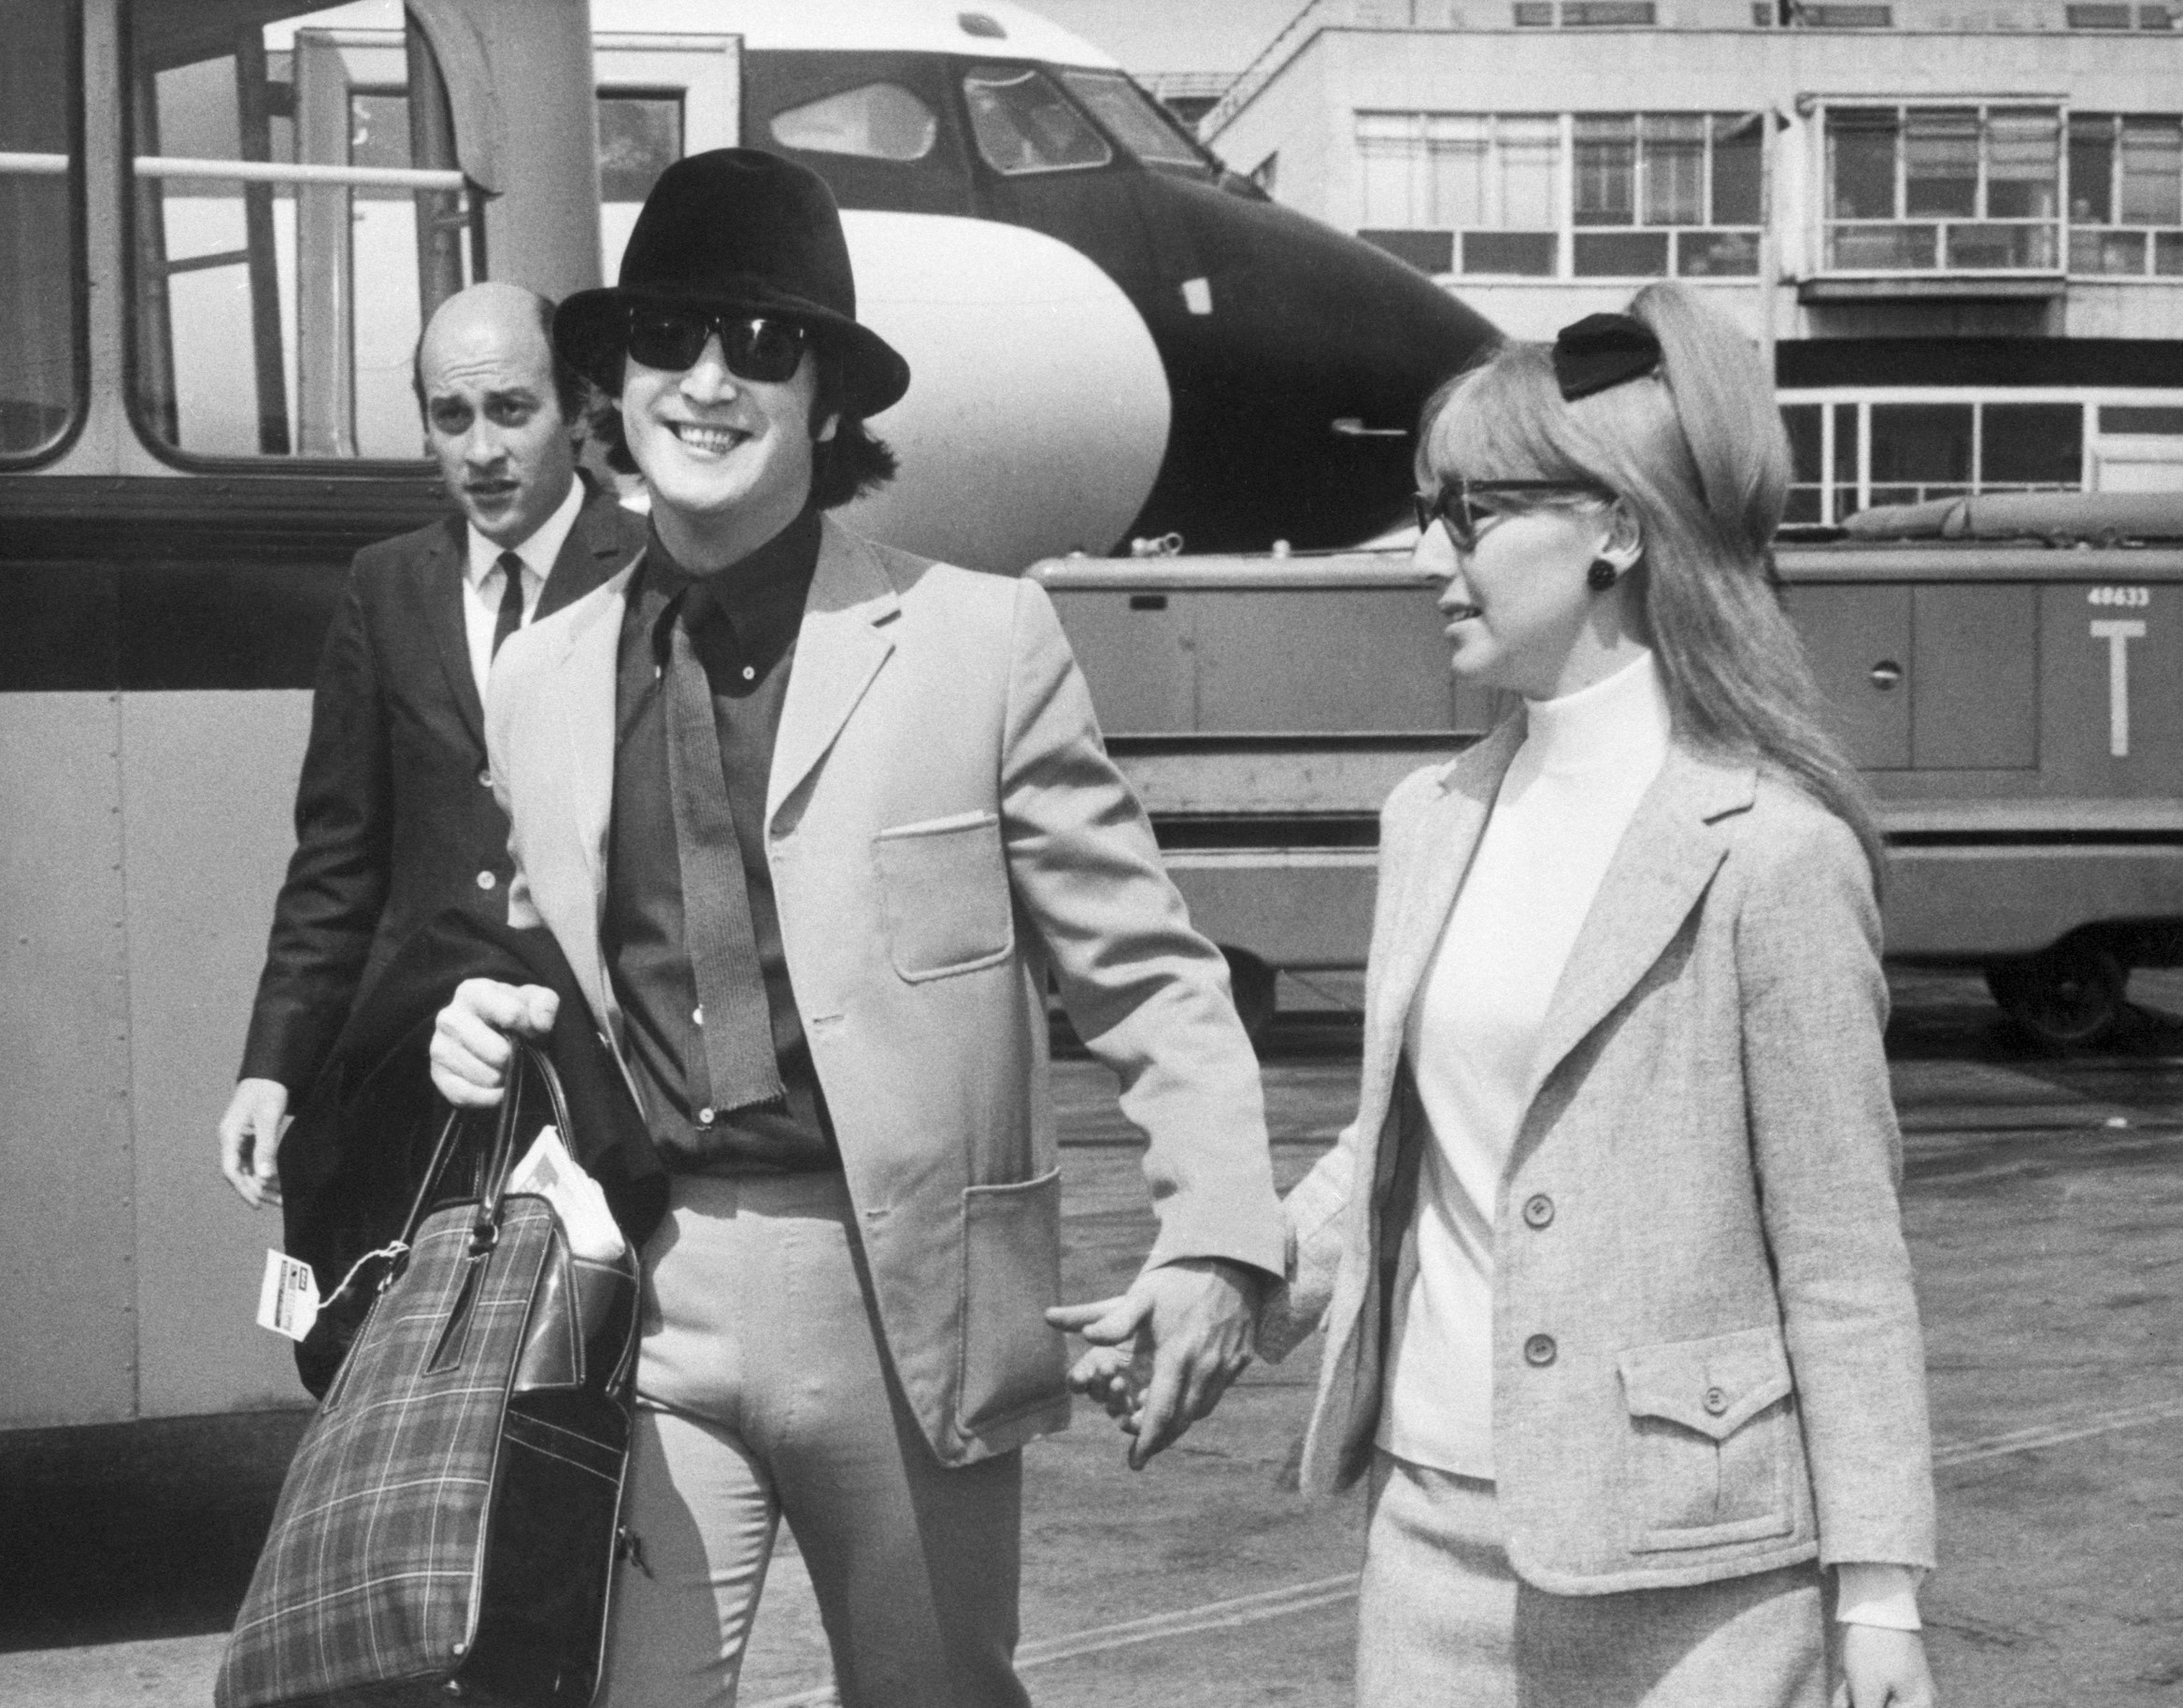 A black and white picture of John Lennon and Cynthia Lennon holding hands at the airport.